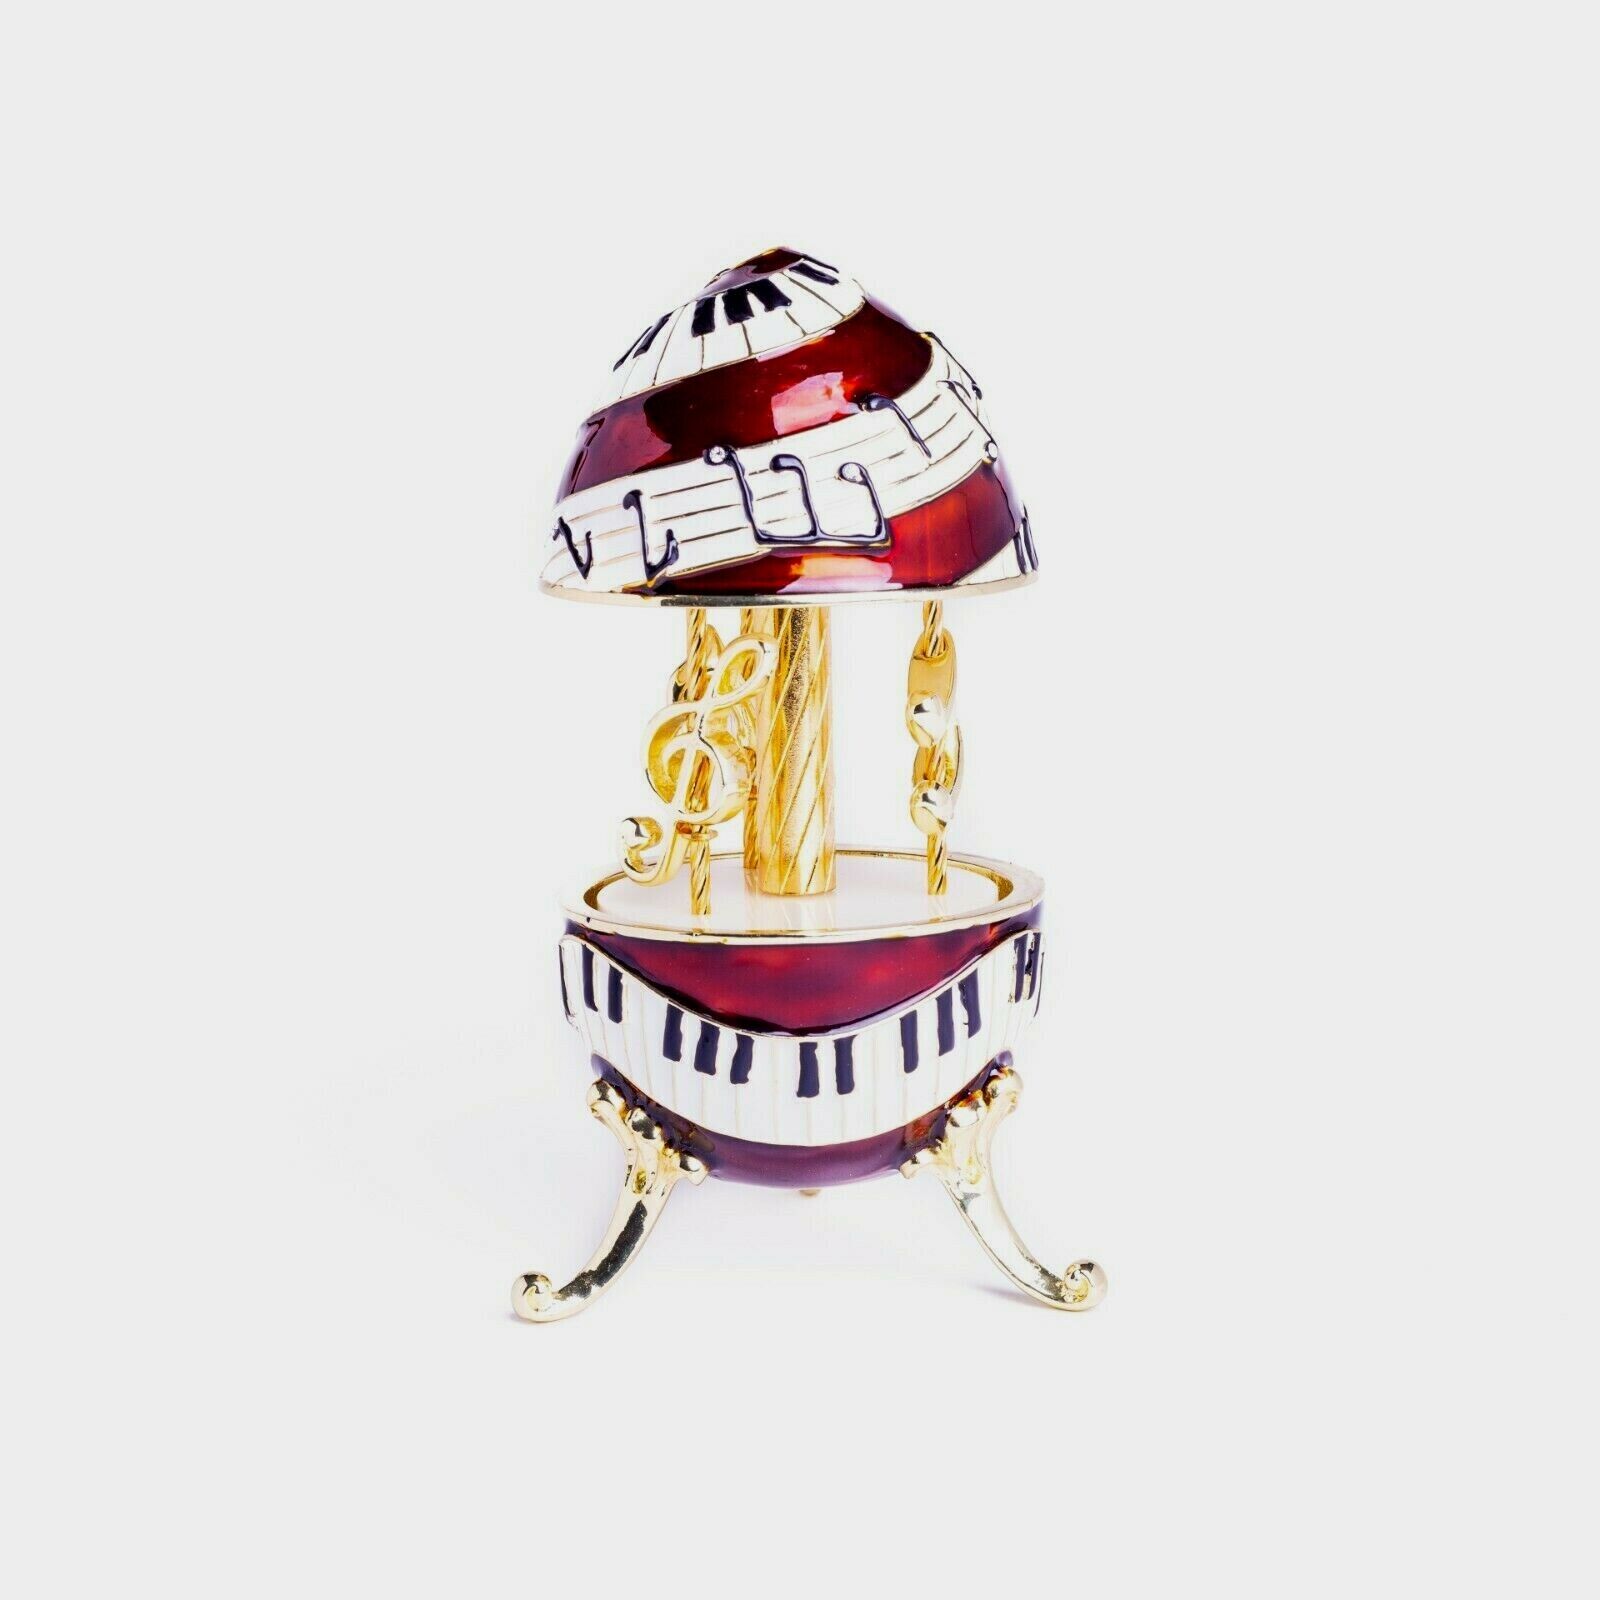 Easter Egg Musical notes Carousel  by Keren Kopal music box with crystal